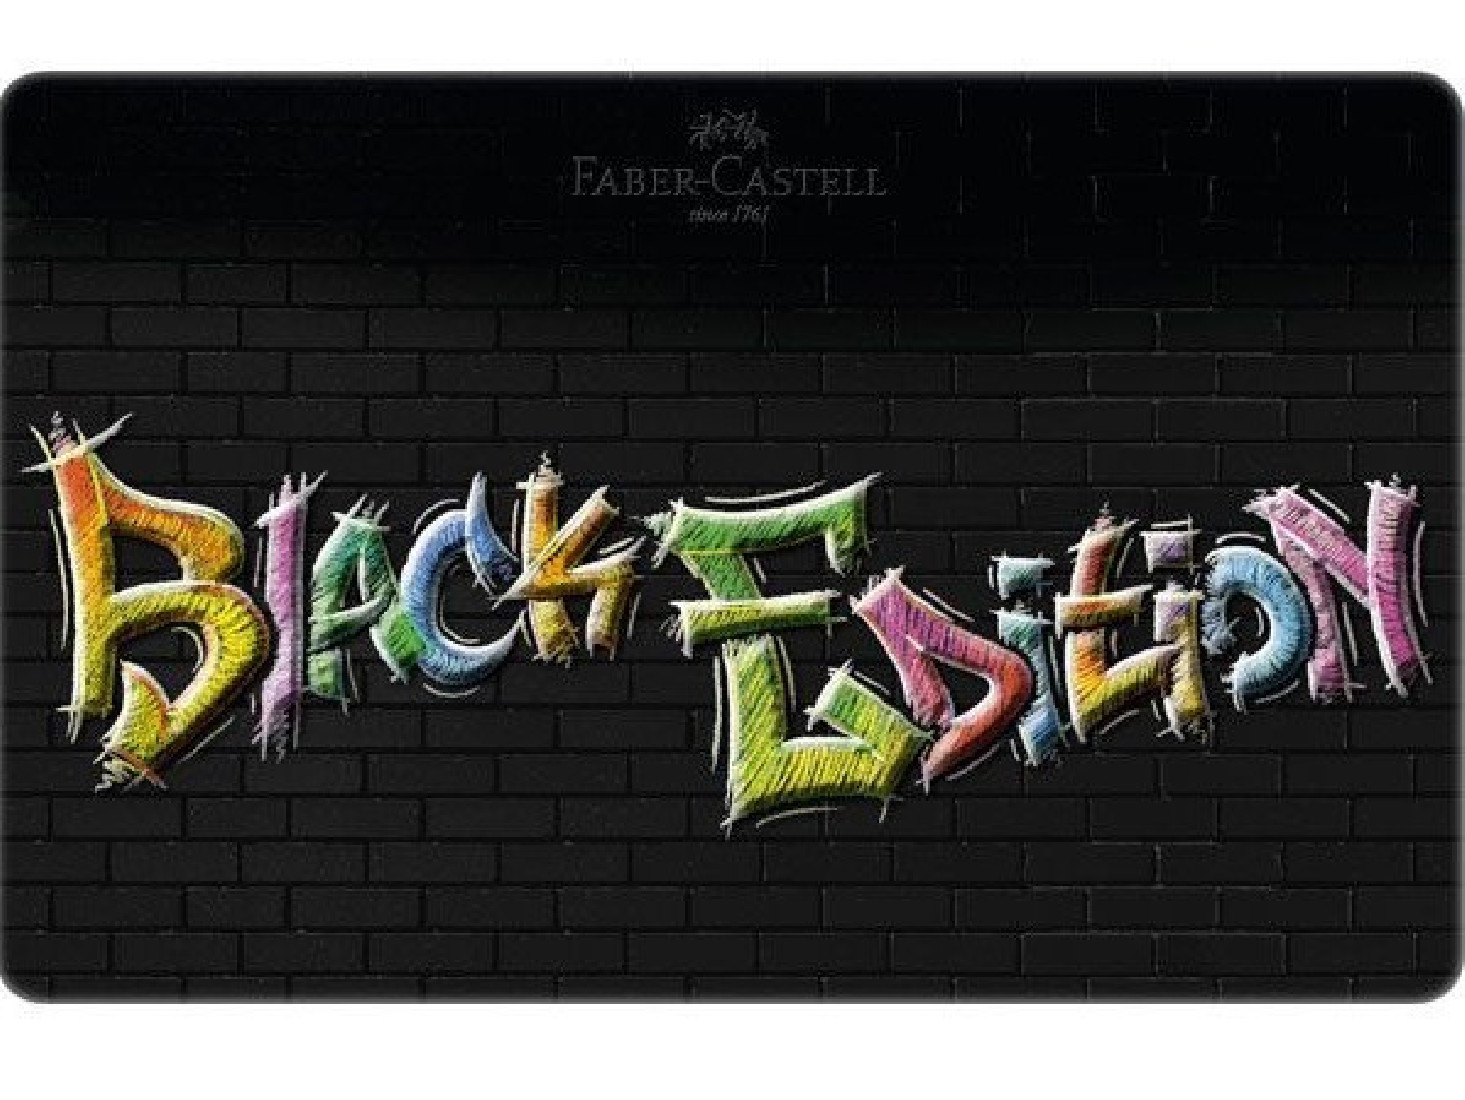 Faber Castell Black Edition 36 Colouring Pencils, Shatterproof, for Children and Adults 116437